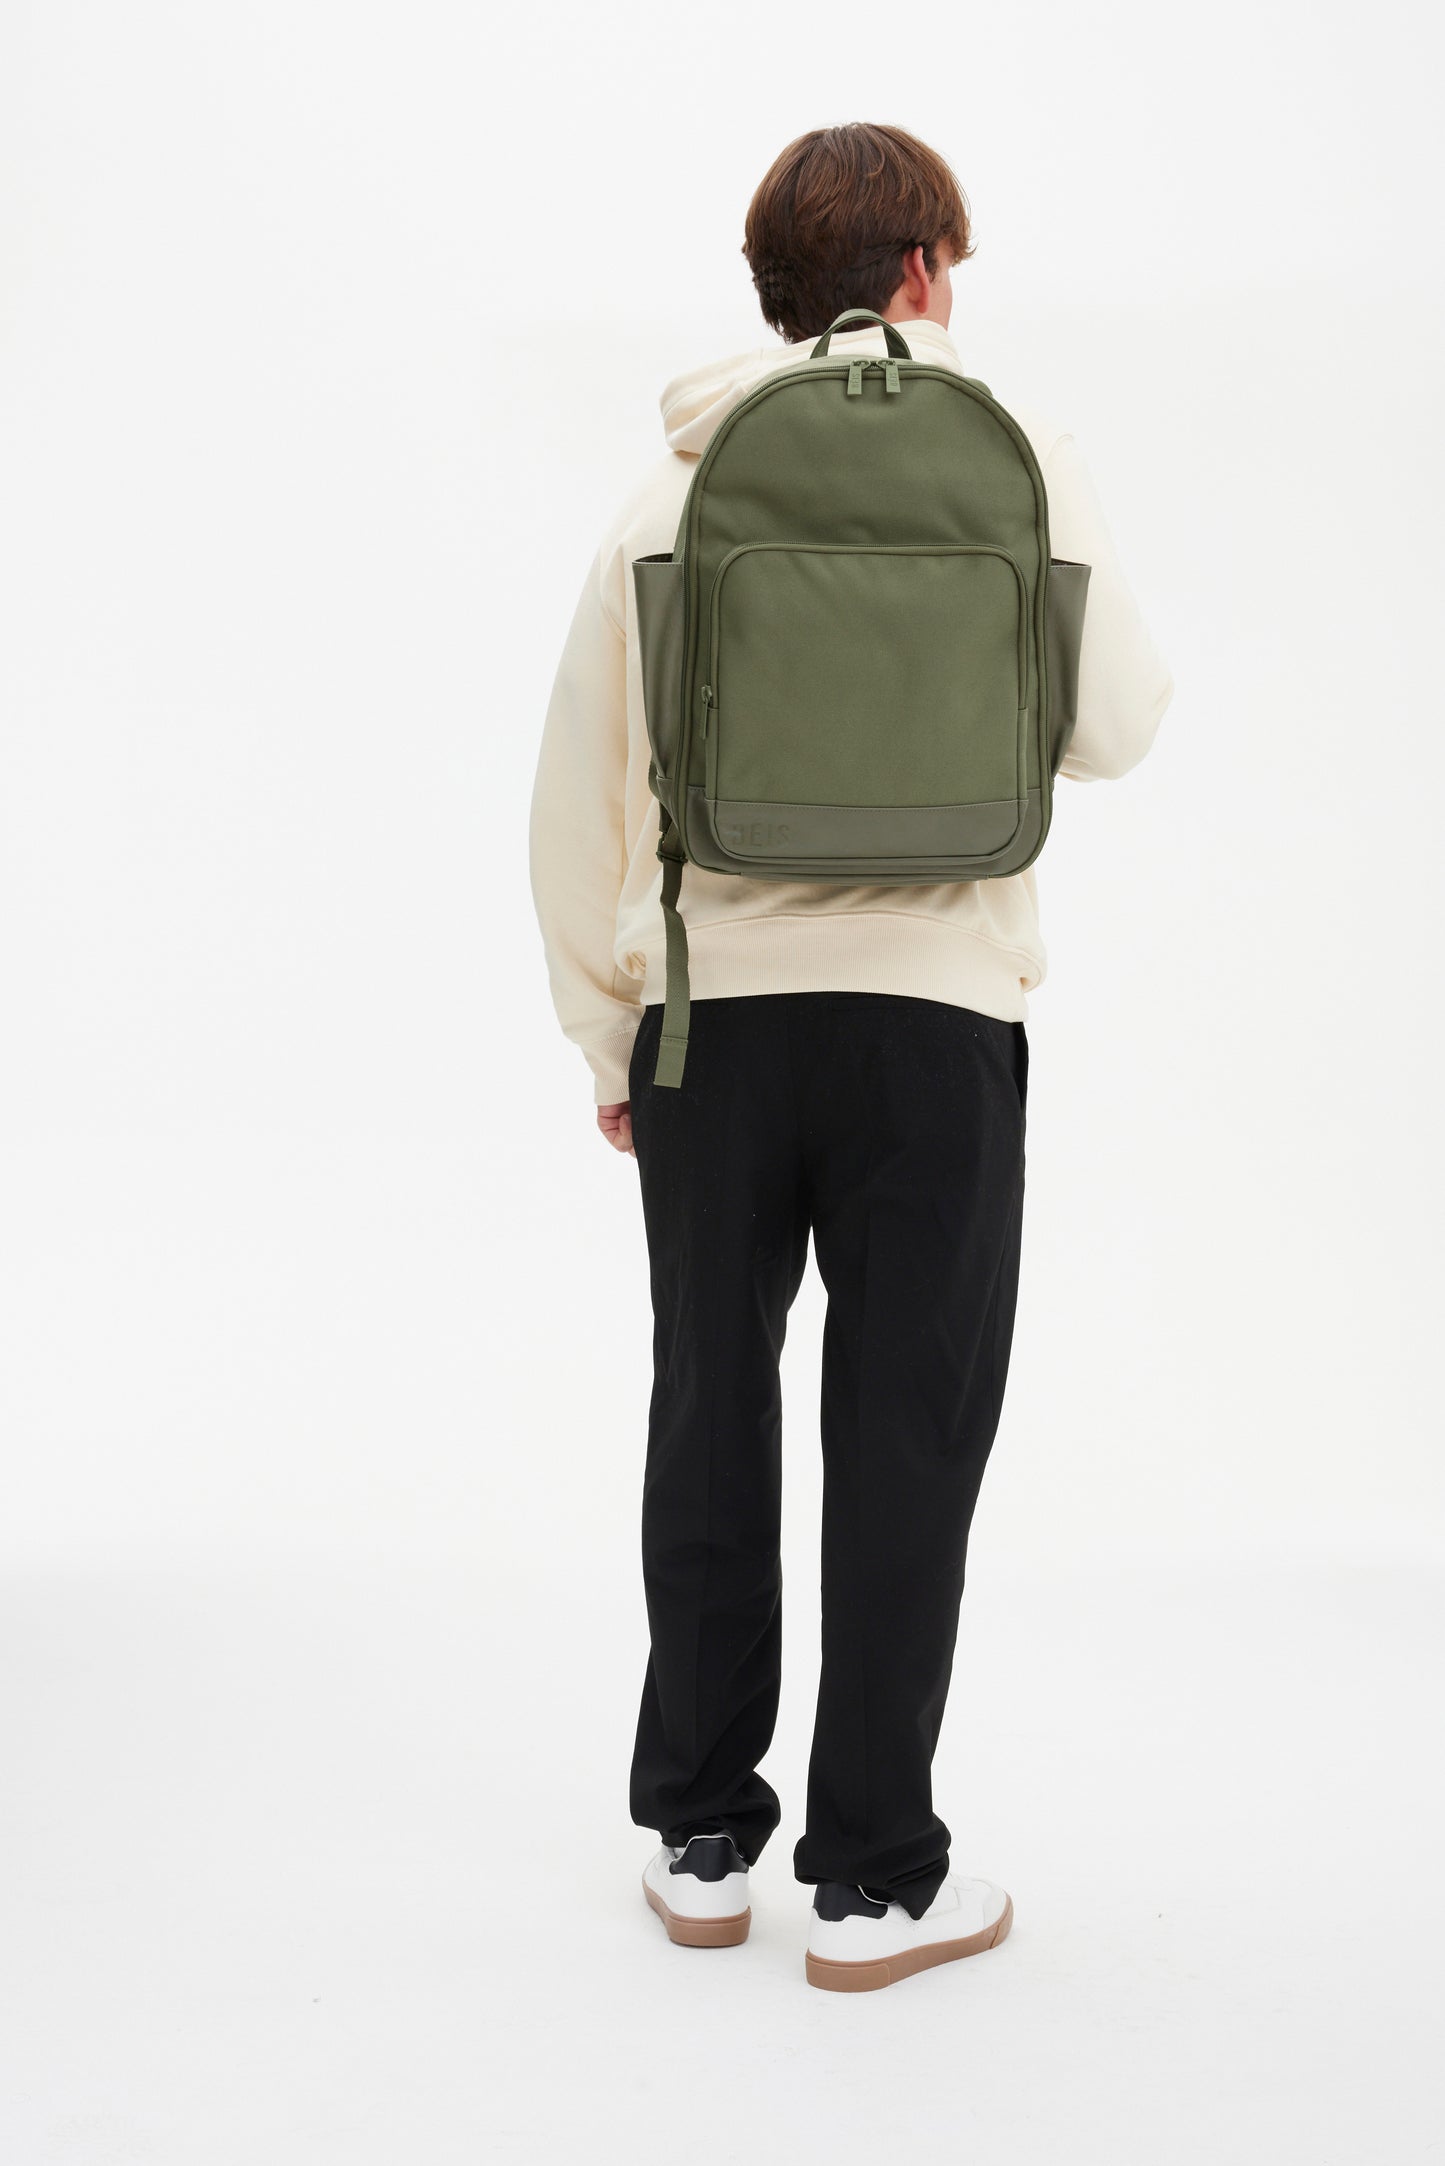 The Backpack in Olive